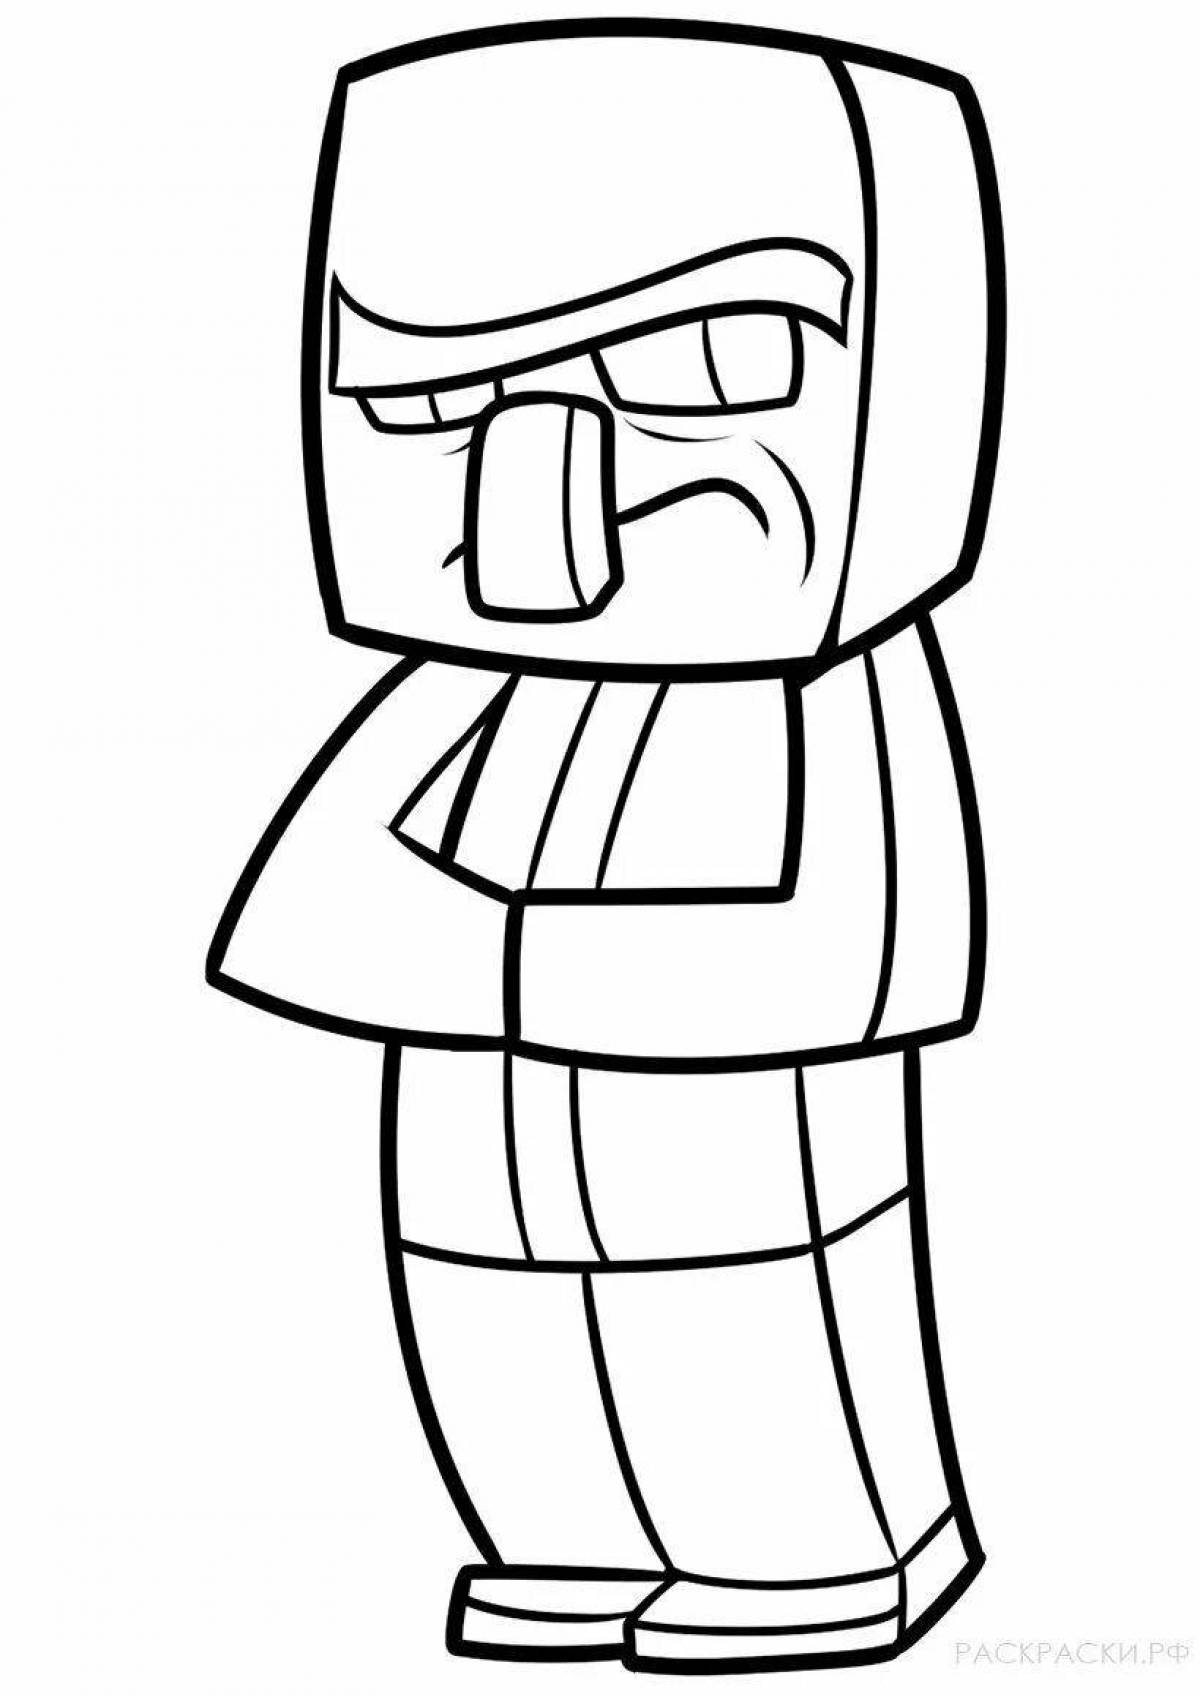 Adorable villagers minecraft coloring page